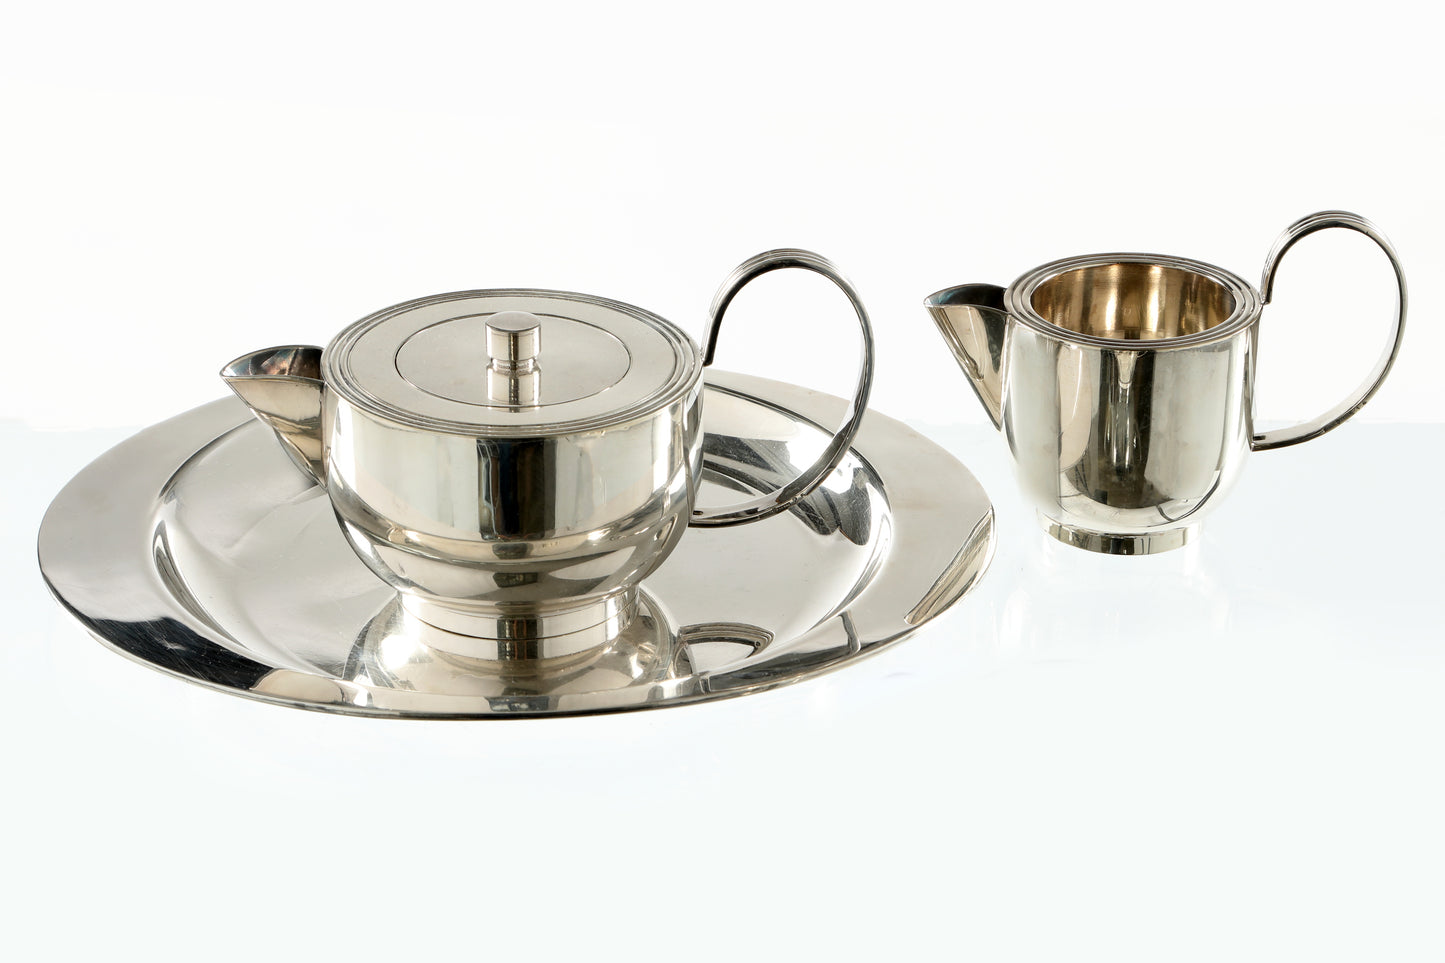 1960s silver plated table set